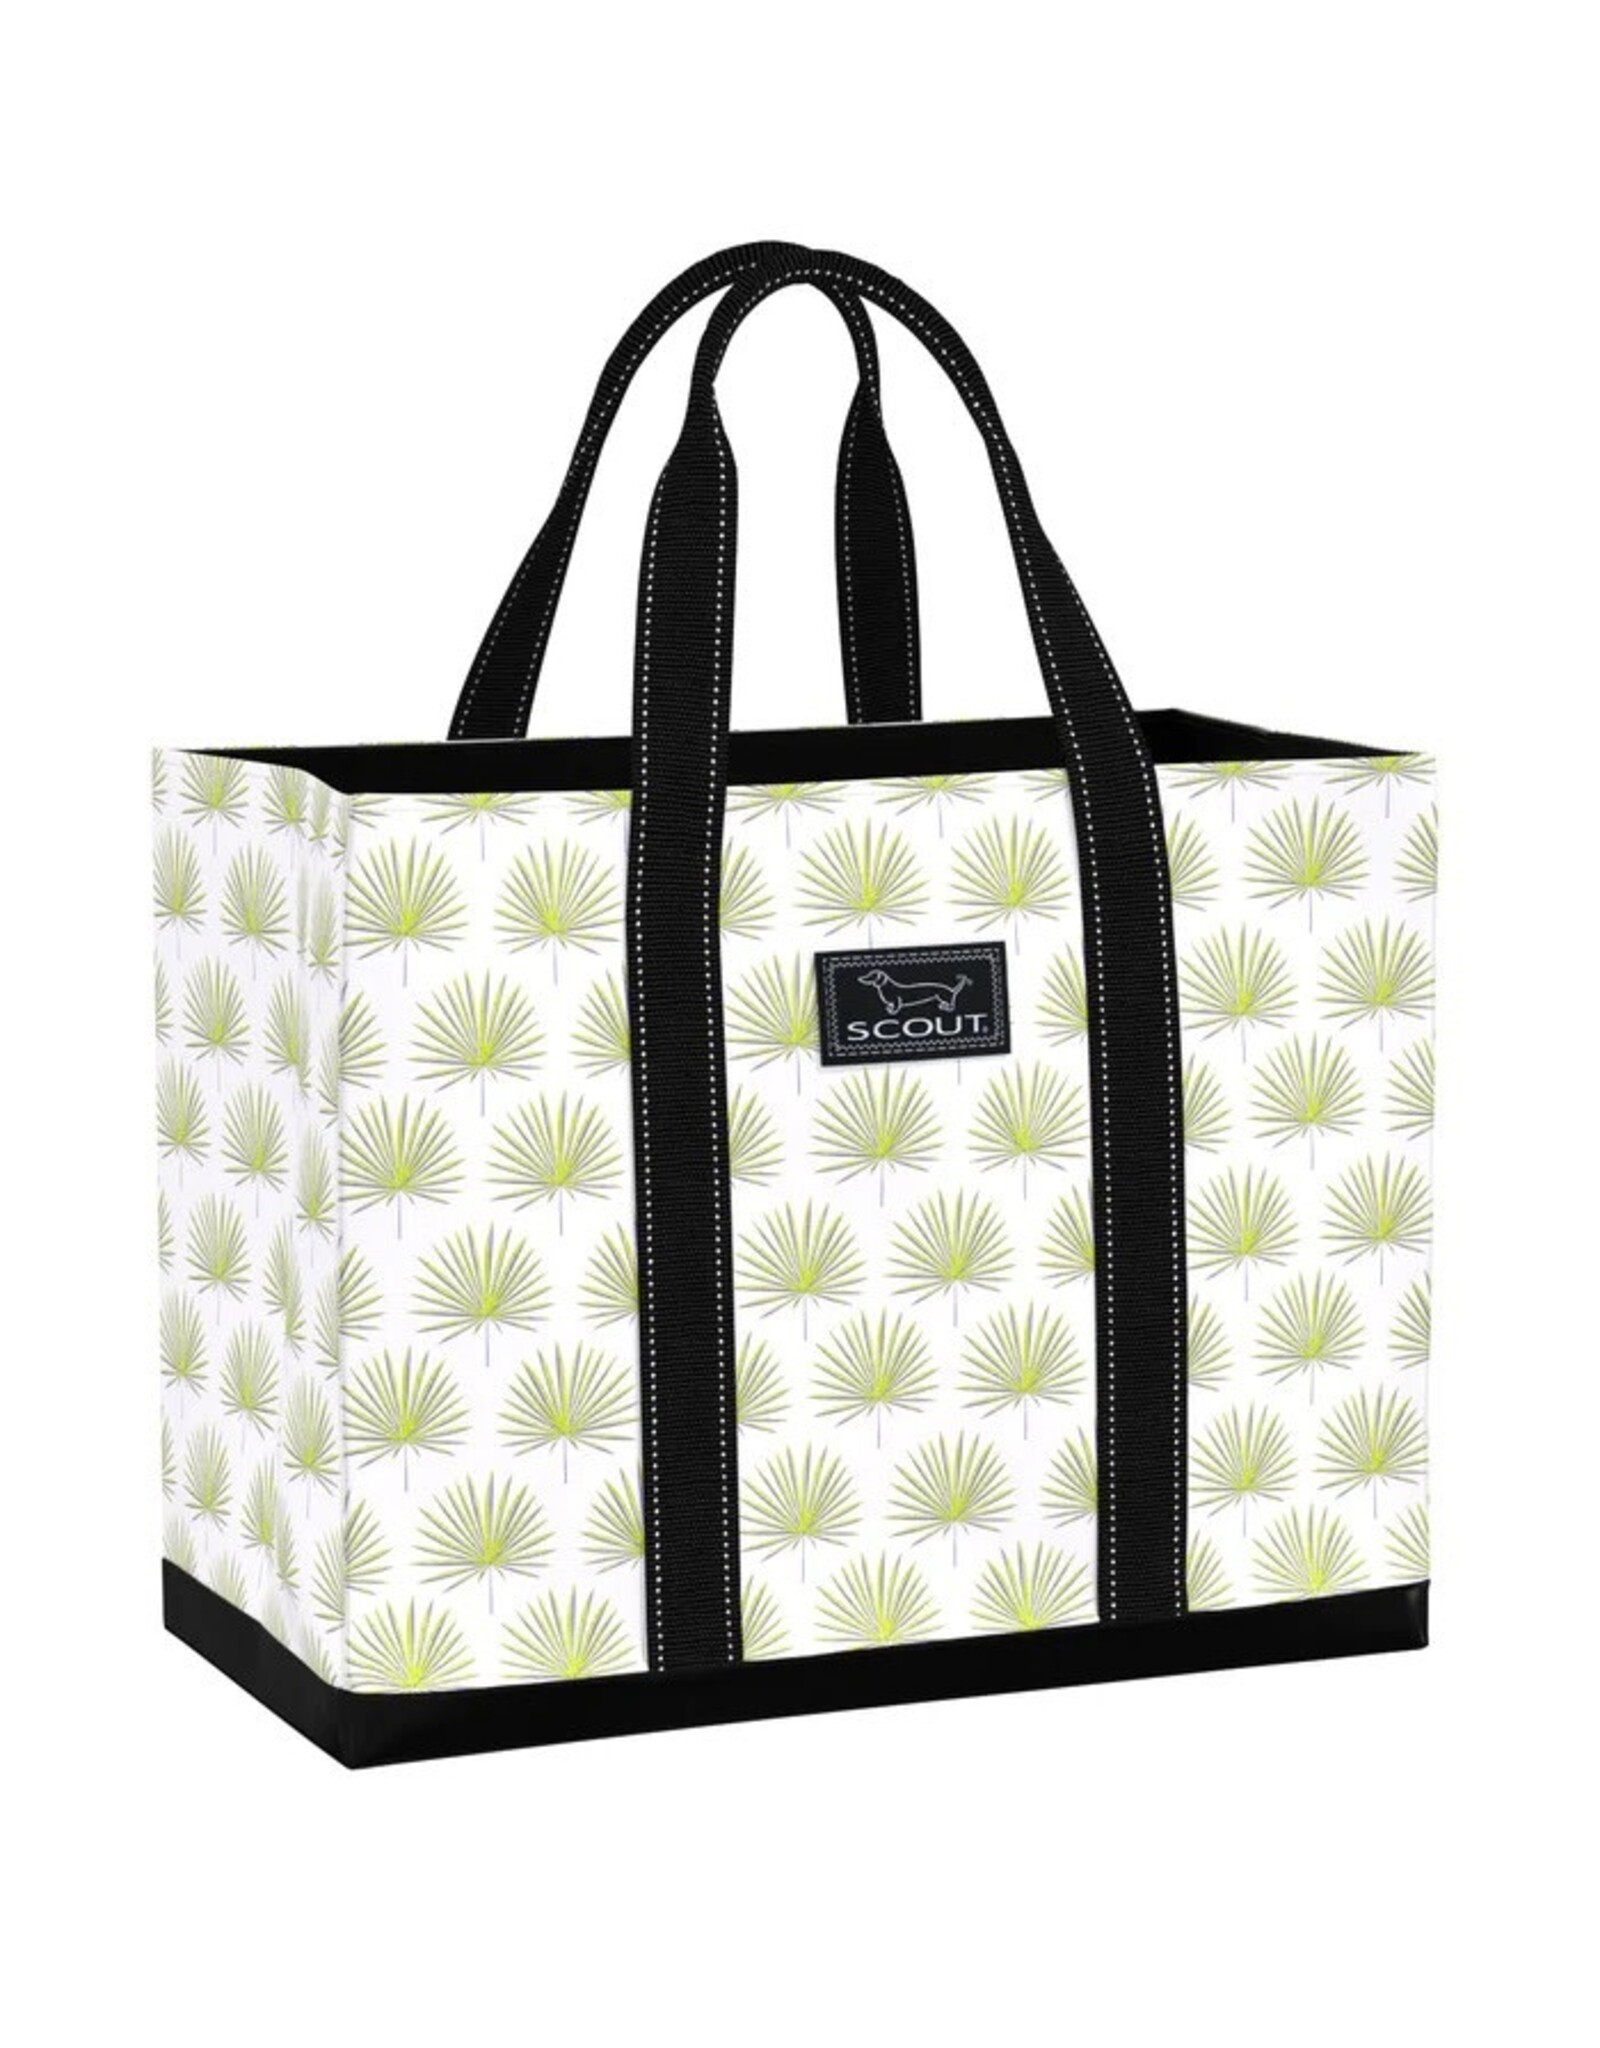 Scout Bags Original Deano Tote Bag Fronds With Benefits